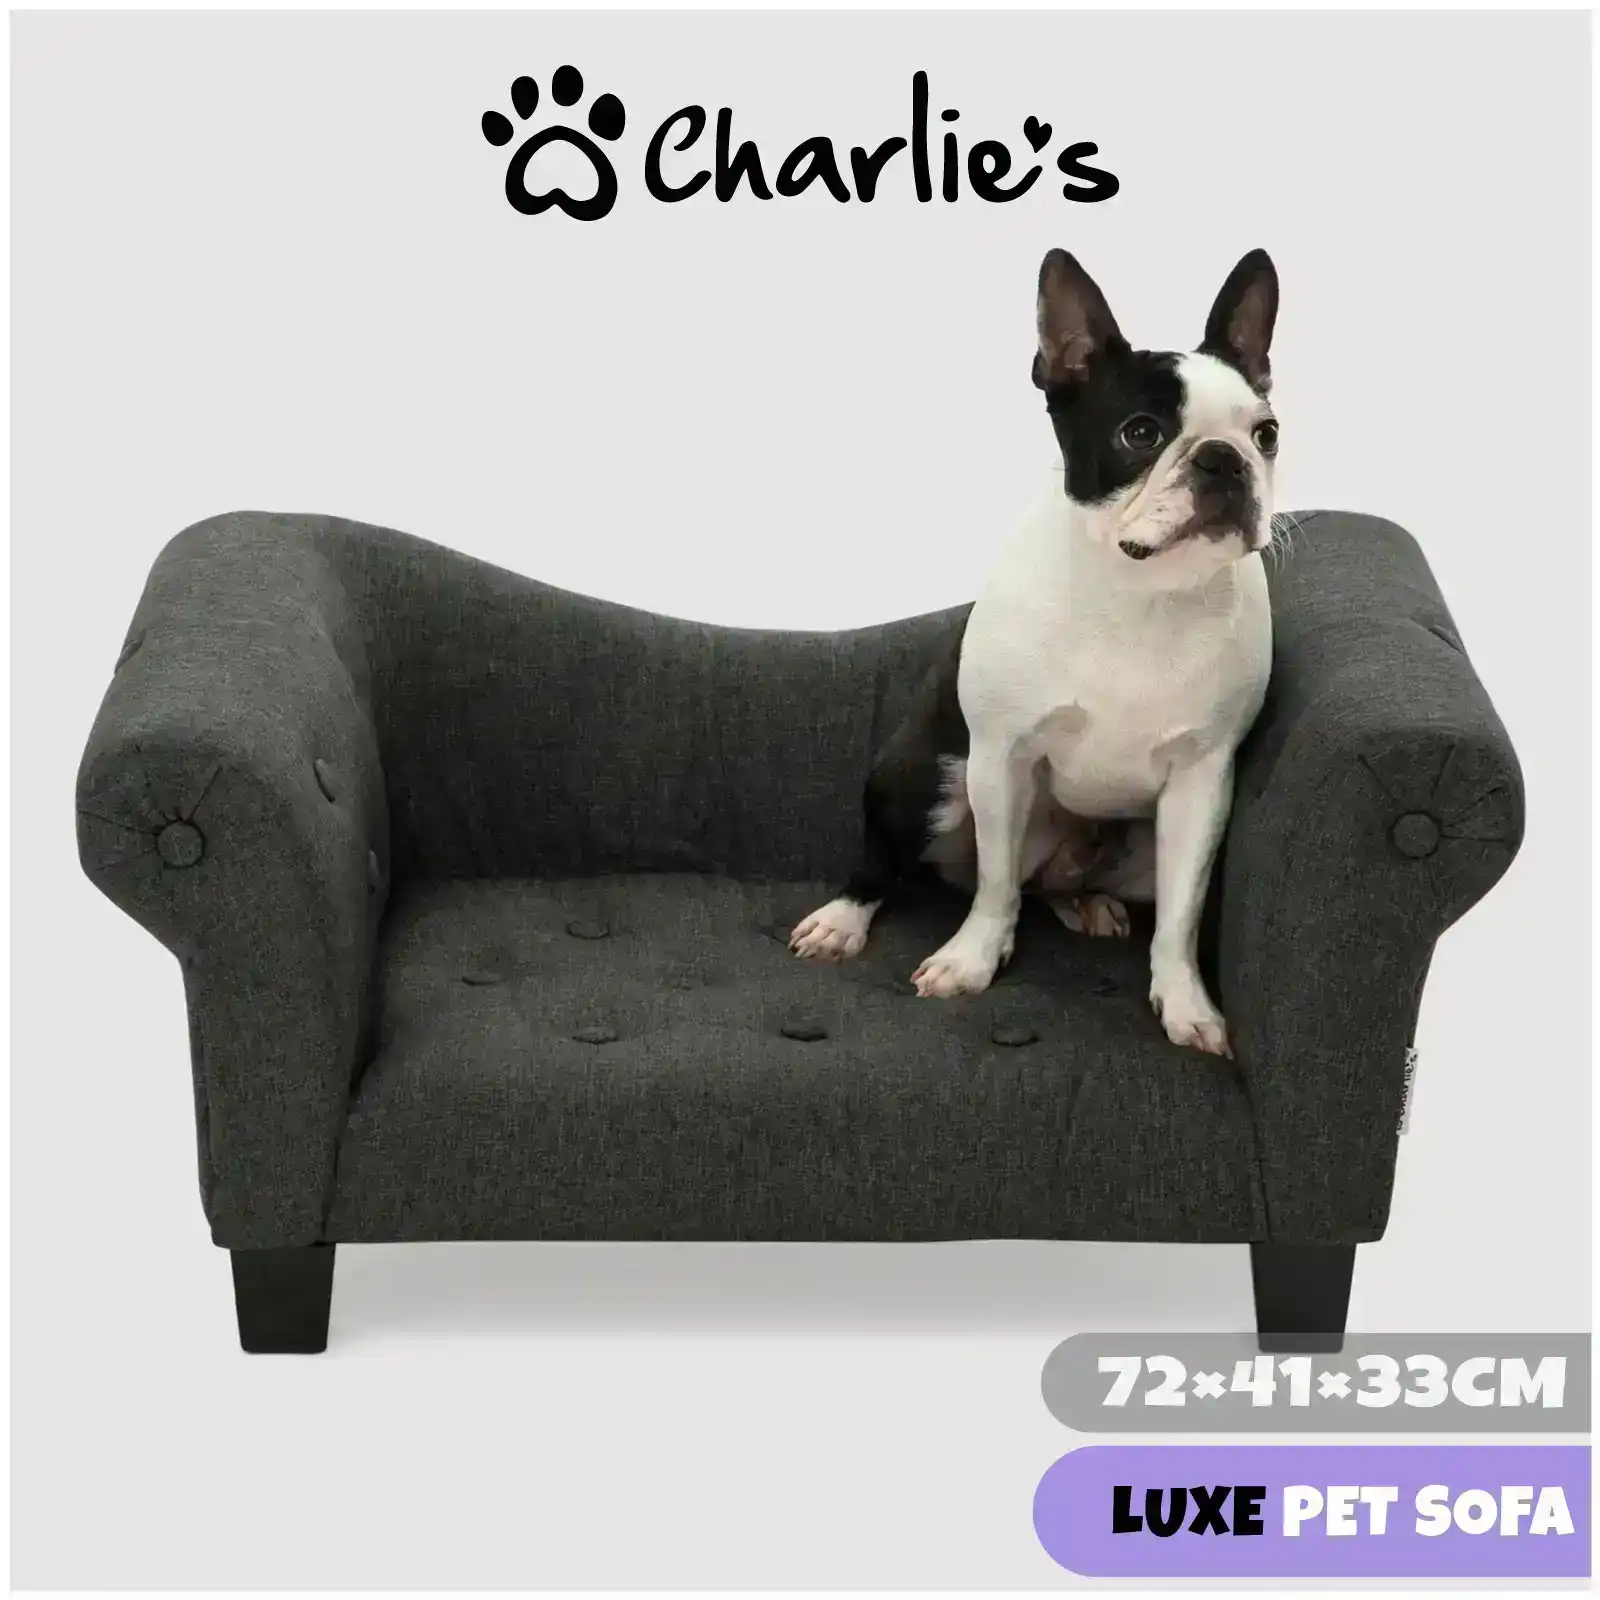 Charlie's Luxe Dog Sofa Charcoal 75×41×33cm